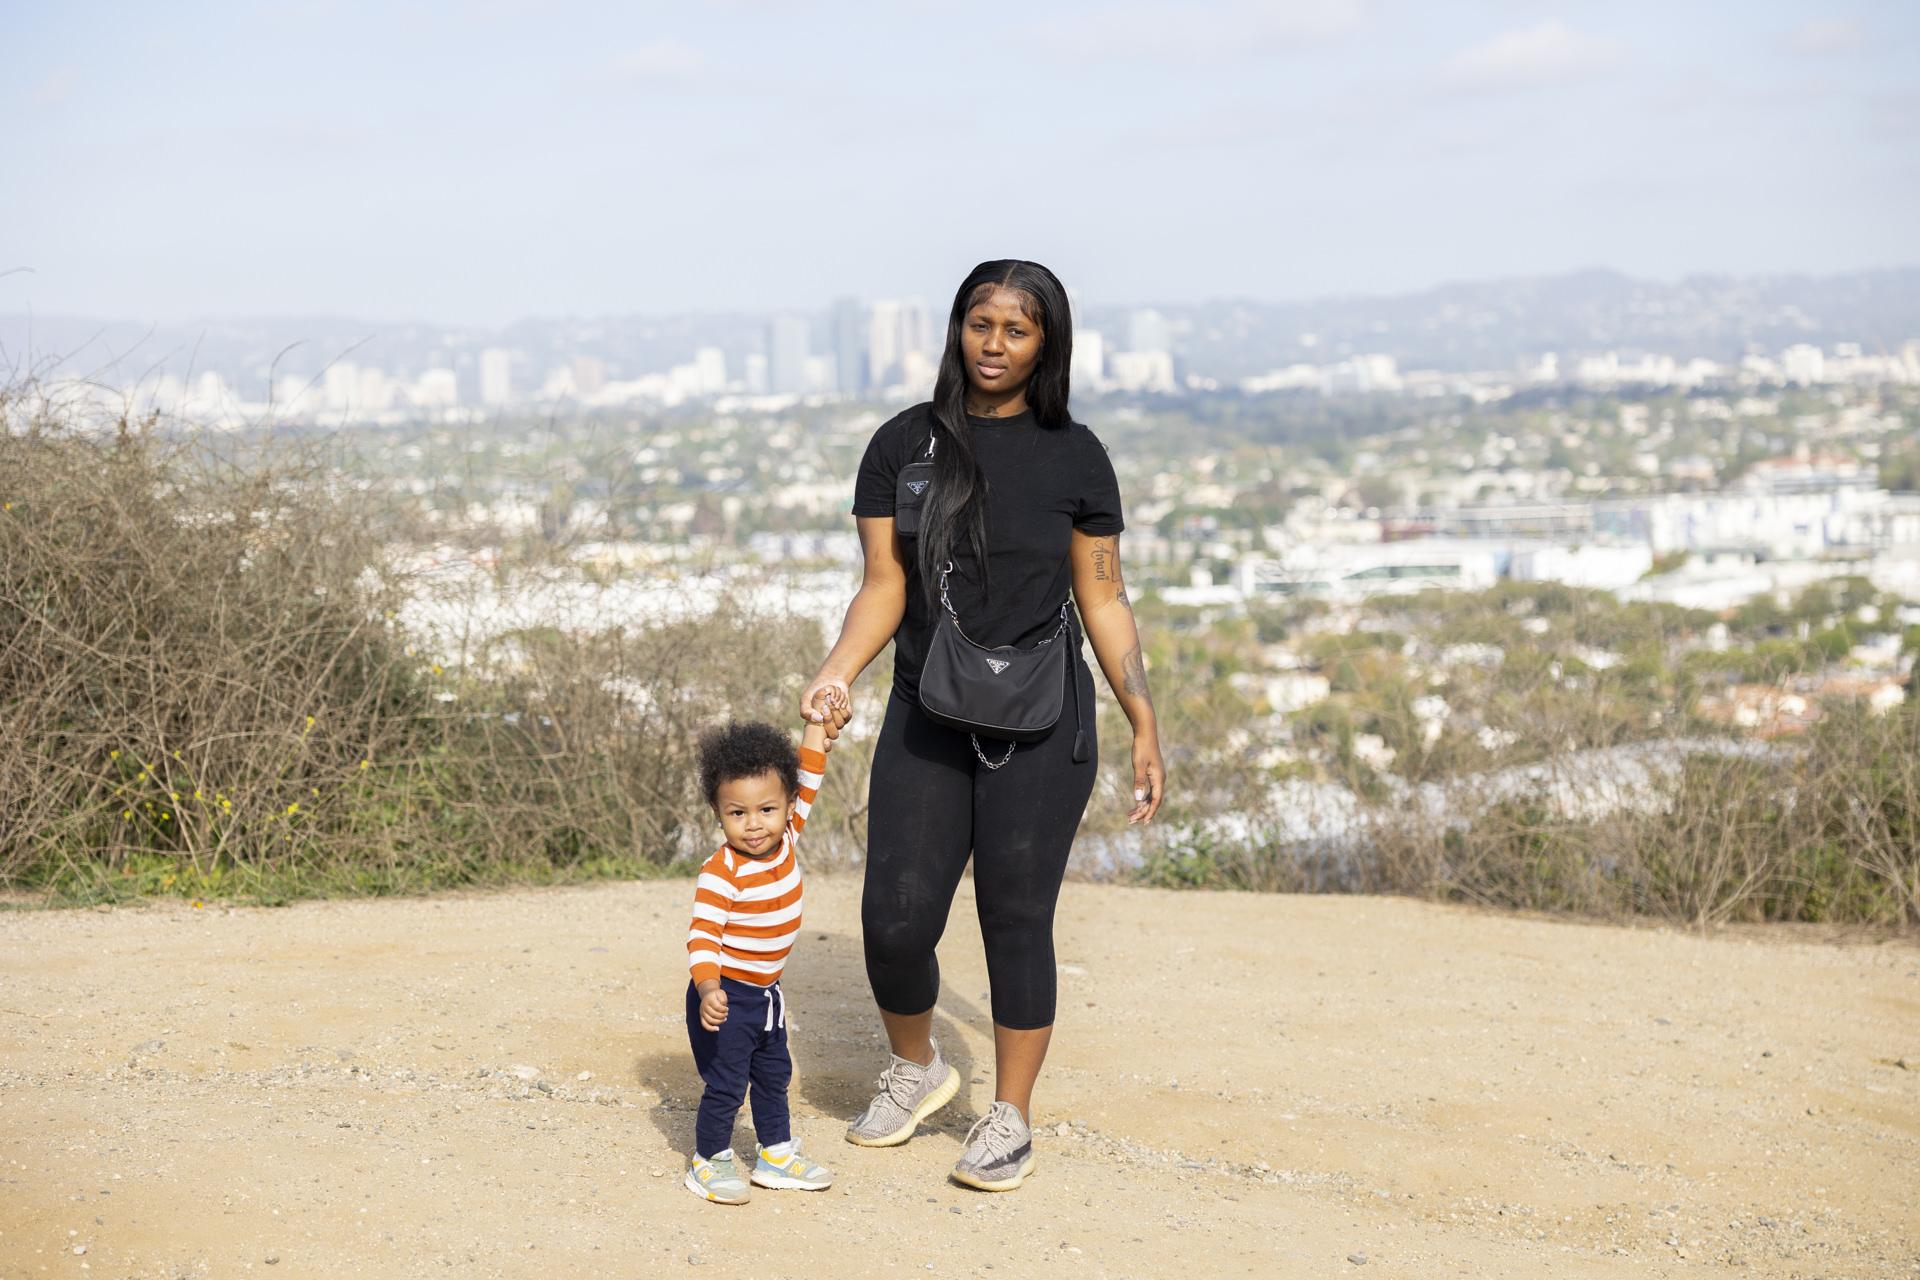 Robert Wood Johnson Foundation - Jessica Hawkins goes on a walk with her 1 year old son...